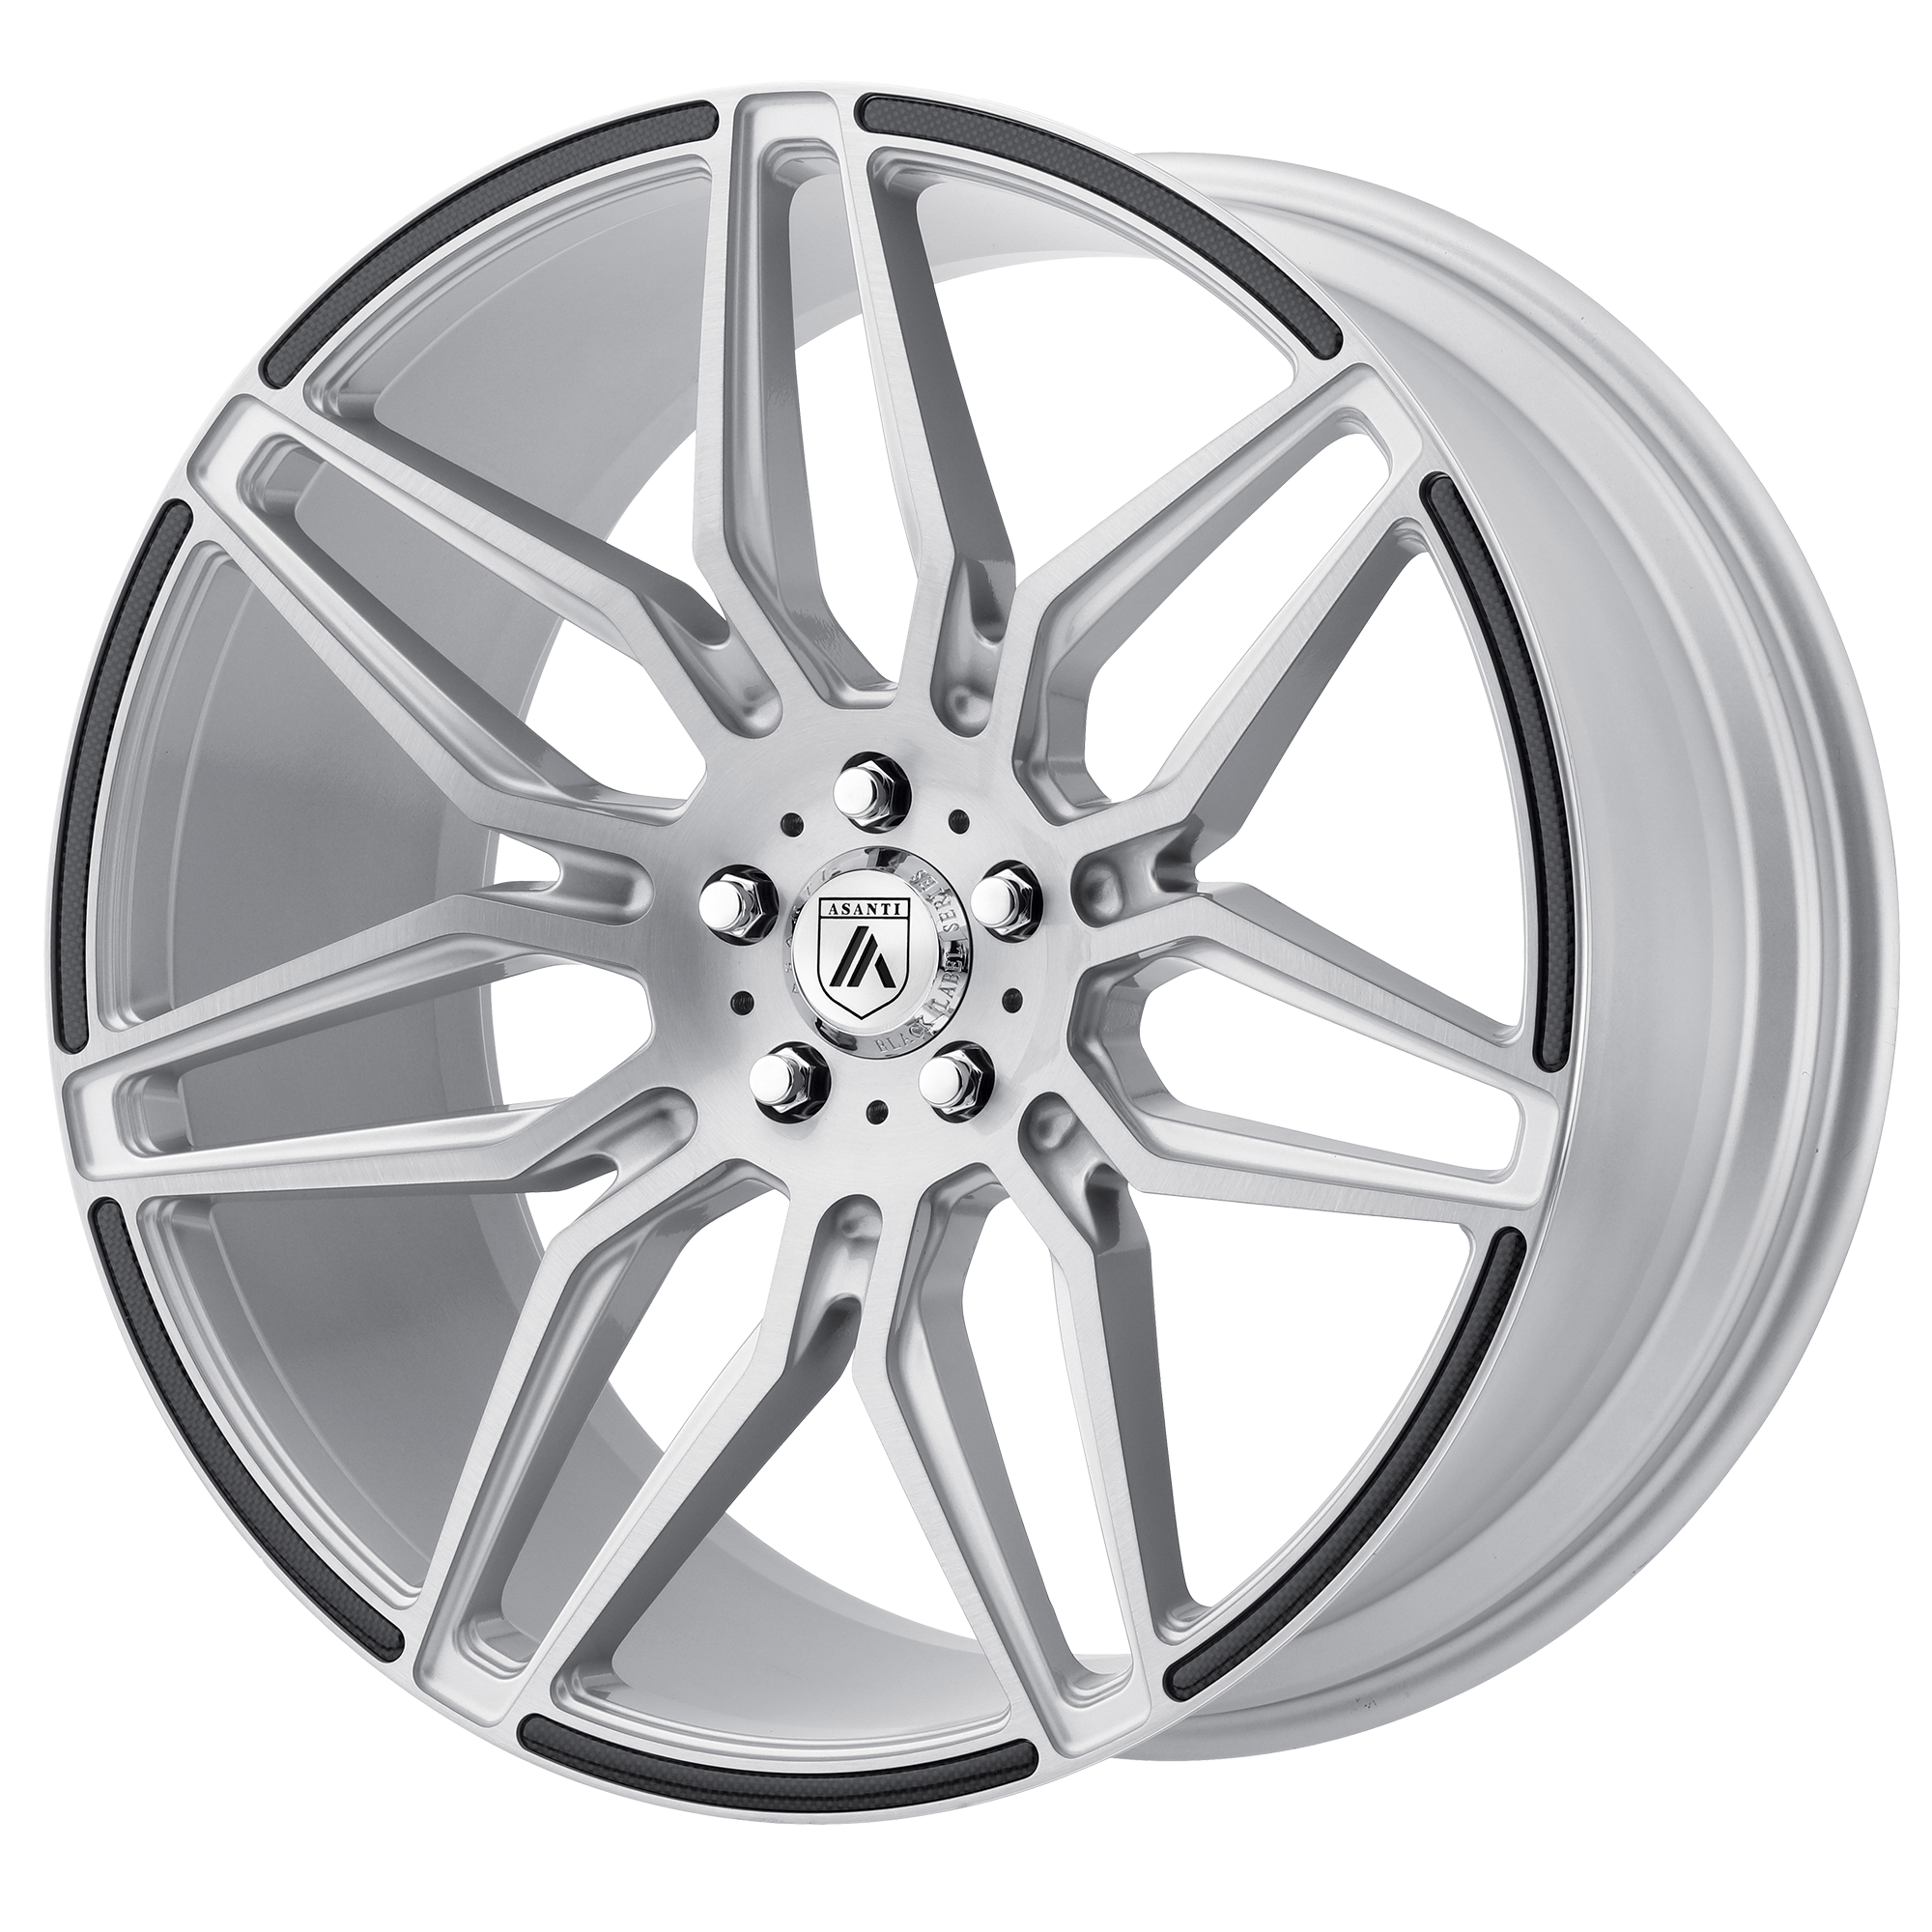 SIRIUS 22x10.5 5x114.30 BRUSHED SILVER W/ CARBON FIBER INSERTS (35 mm) - Tires and Engine Performance